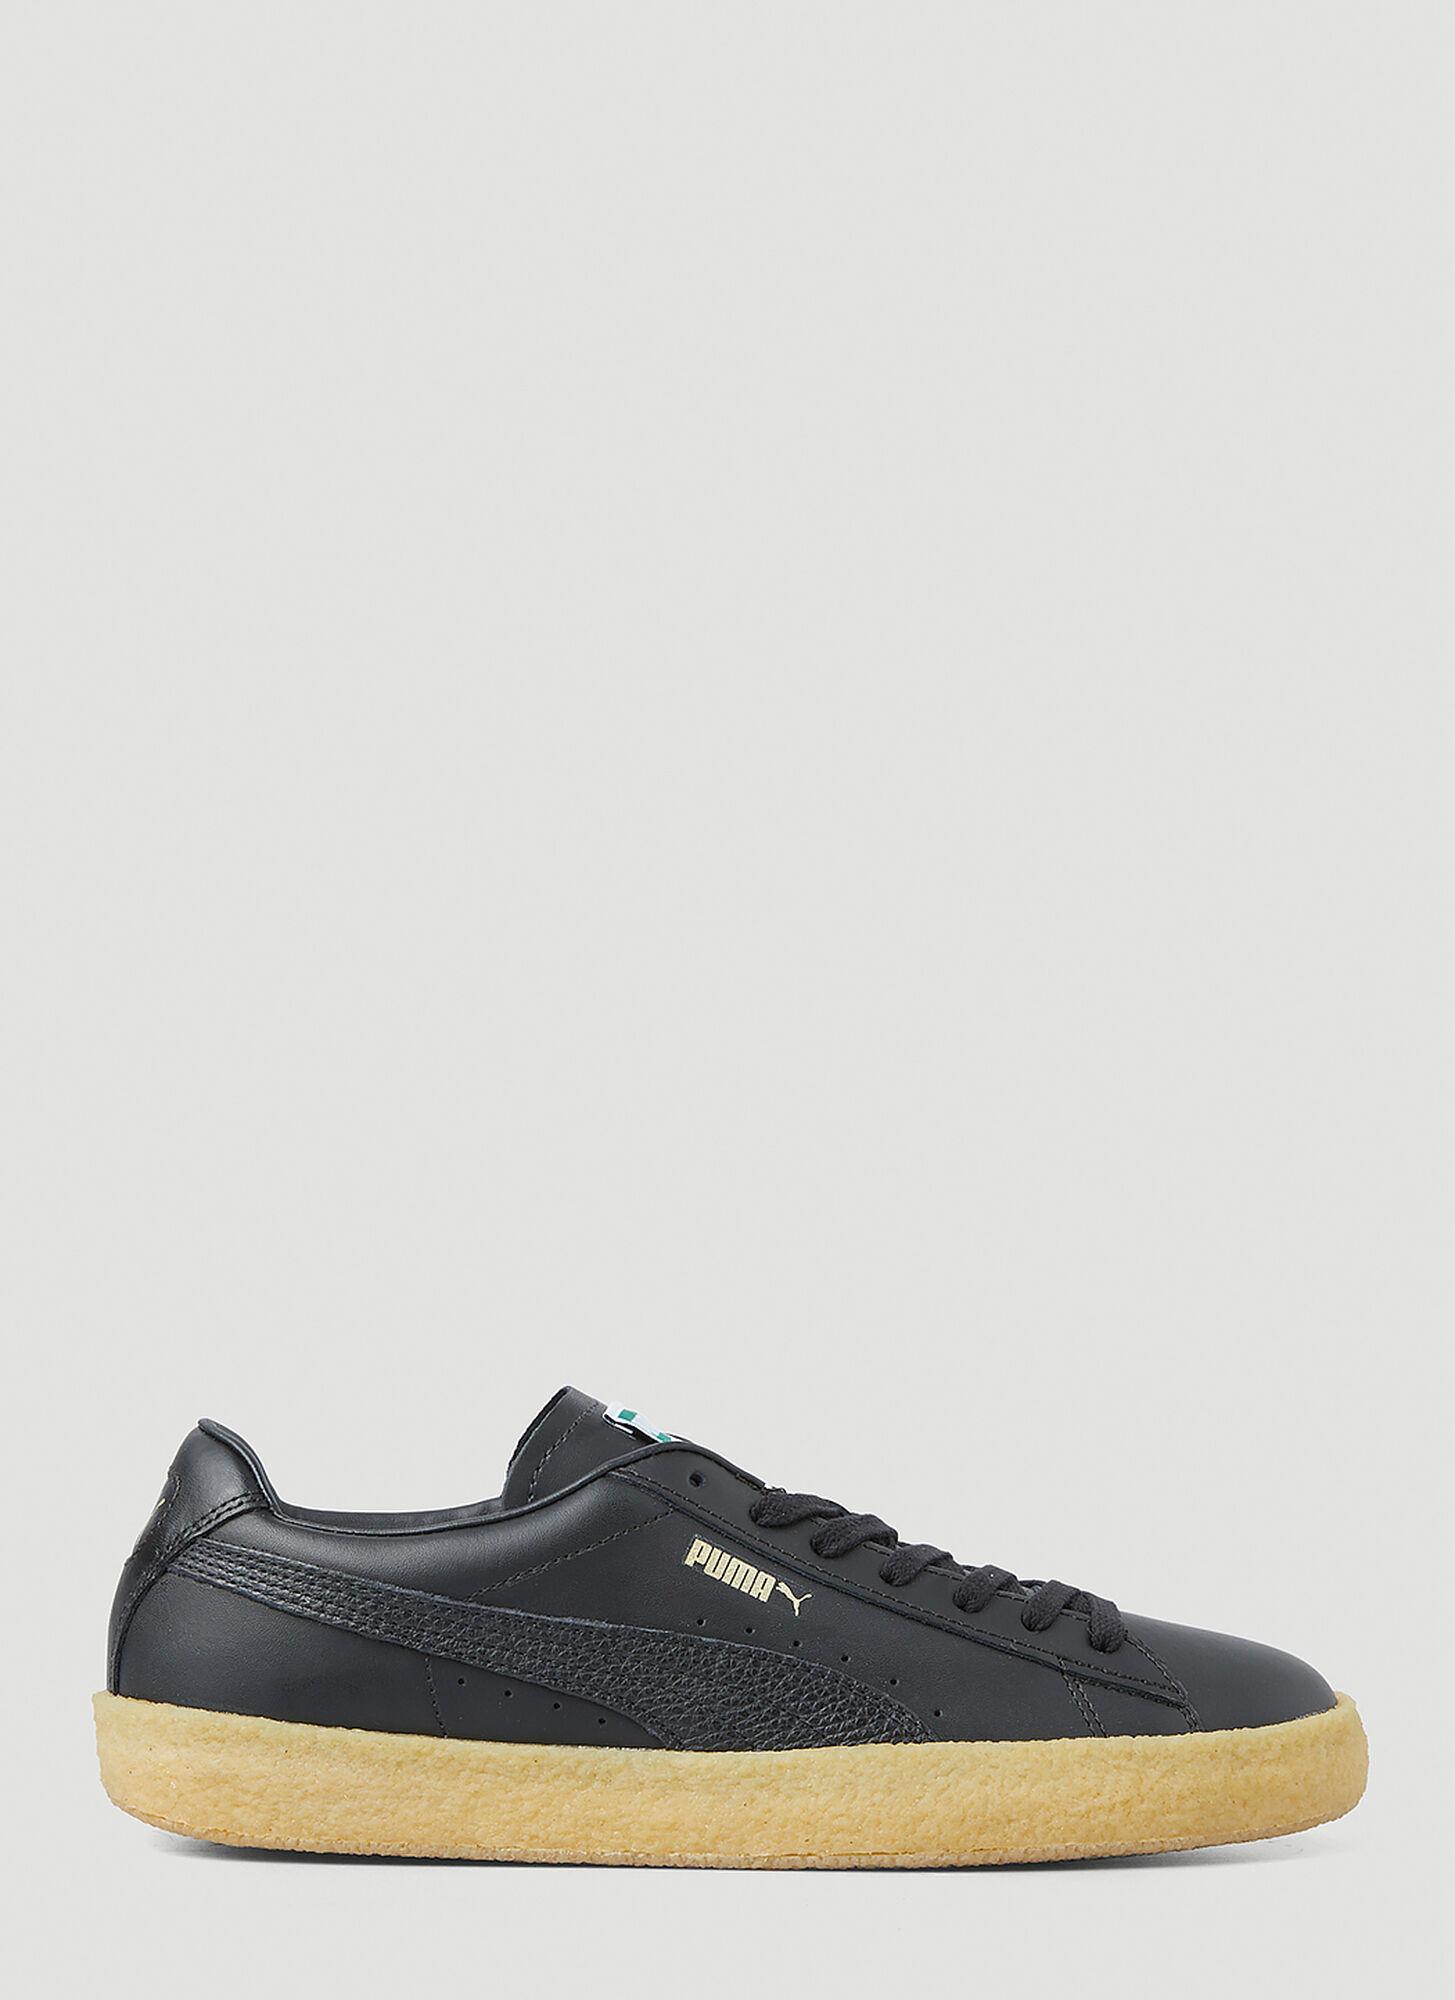 PUMA Suede Crepe Leather Sneakers in Black for Men | Lyst